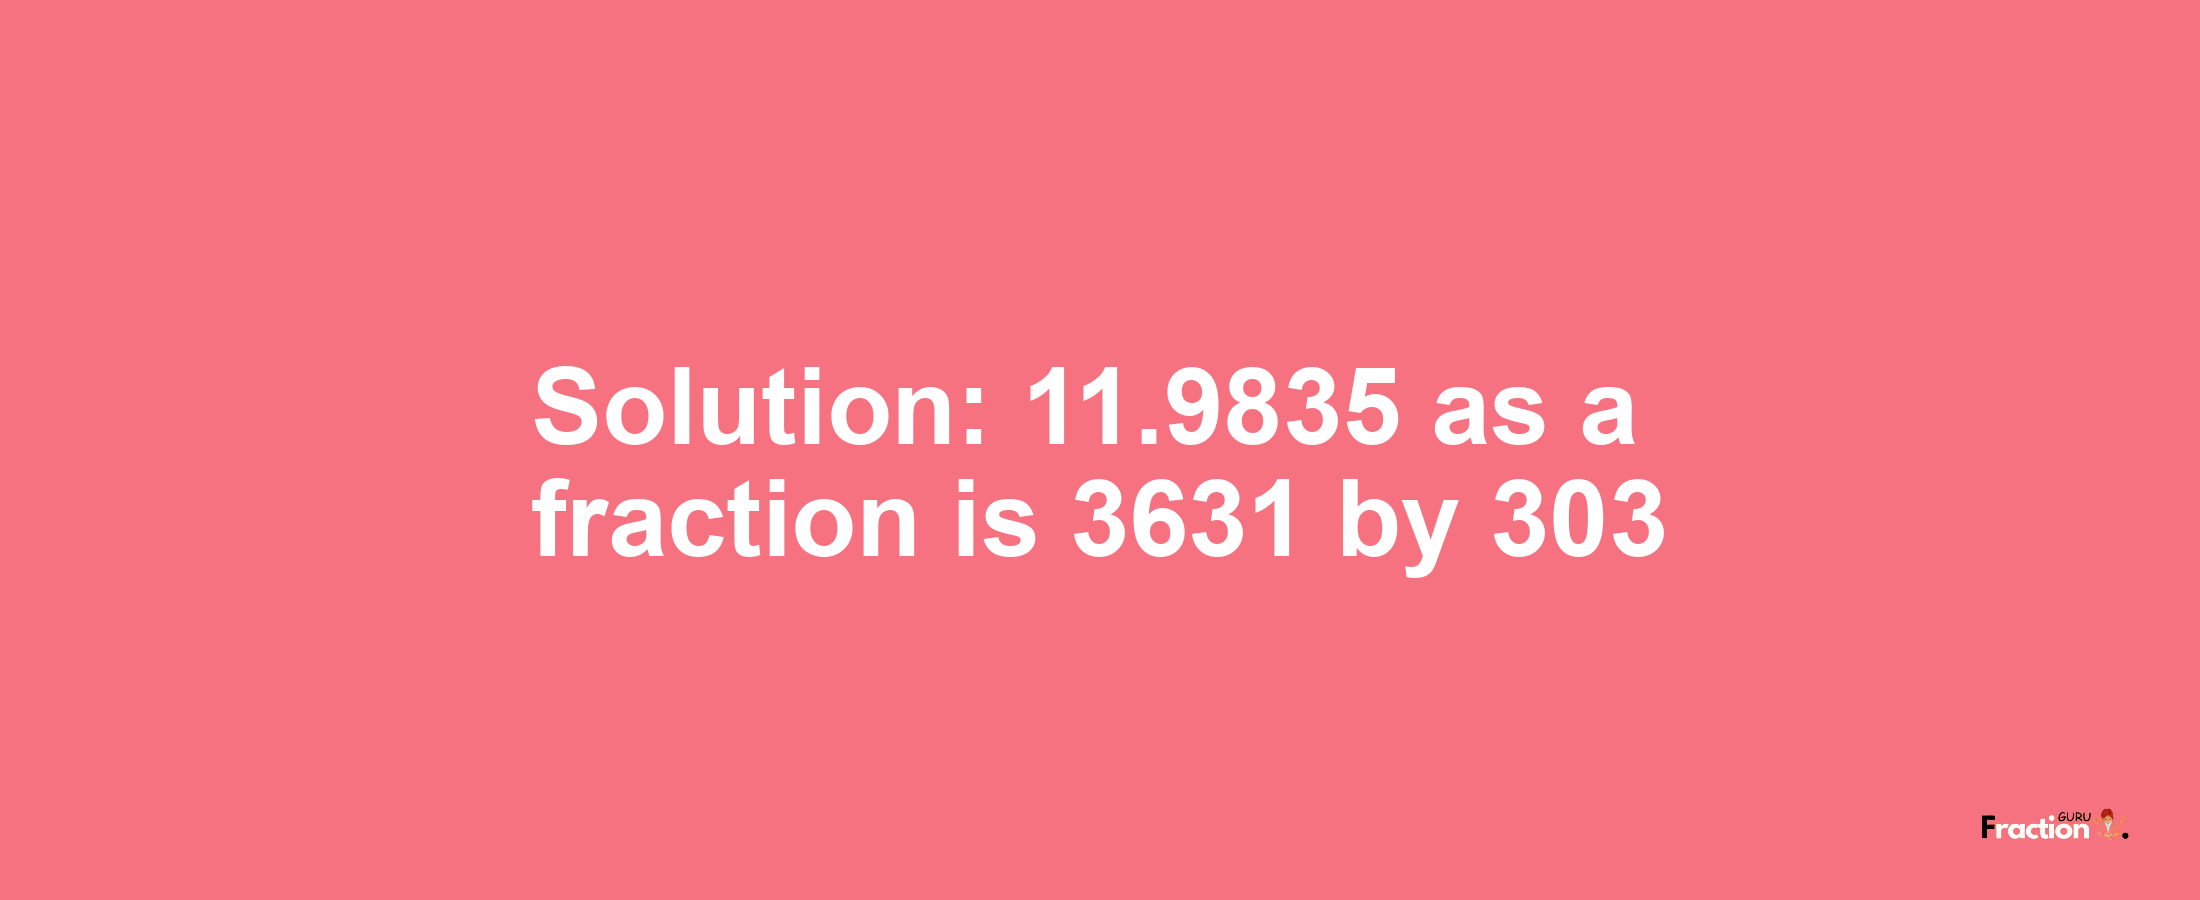 Solution:11.9835 as a fraction is 3631/303